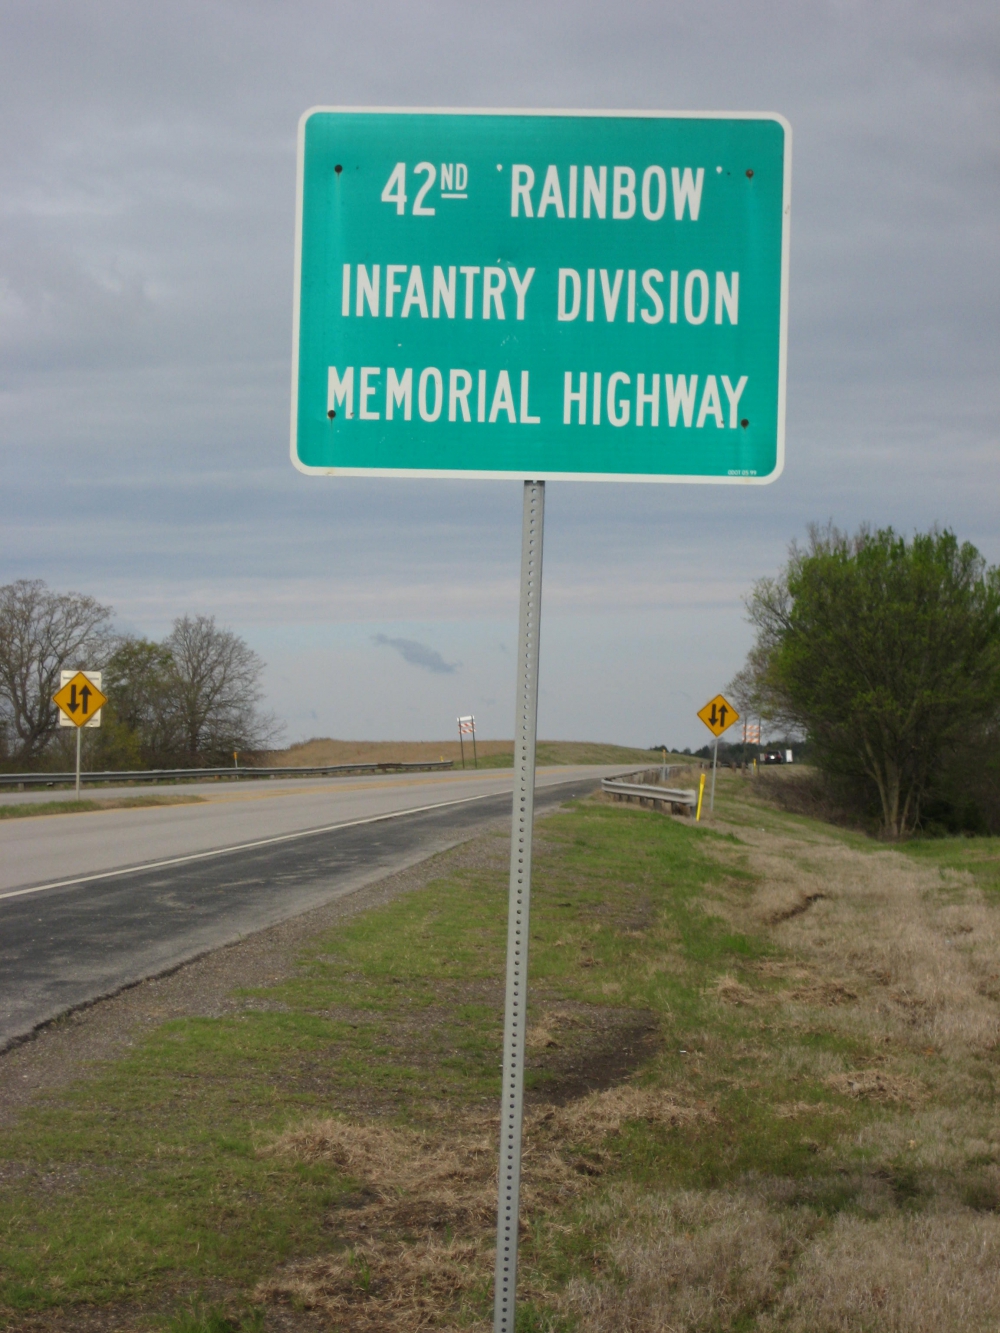 42nd “Rainbow” Infantry Division Memorial Highway